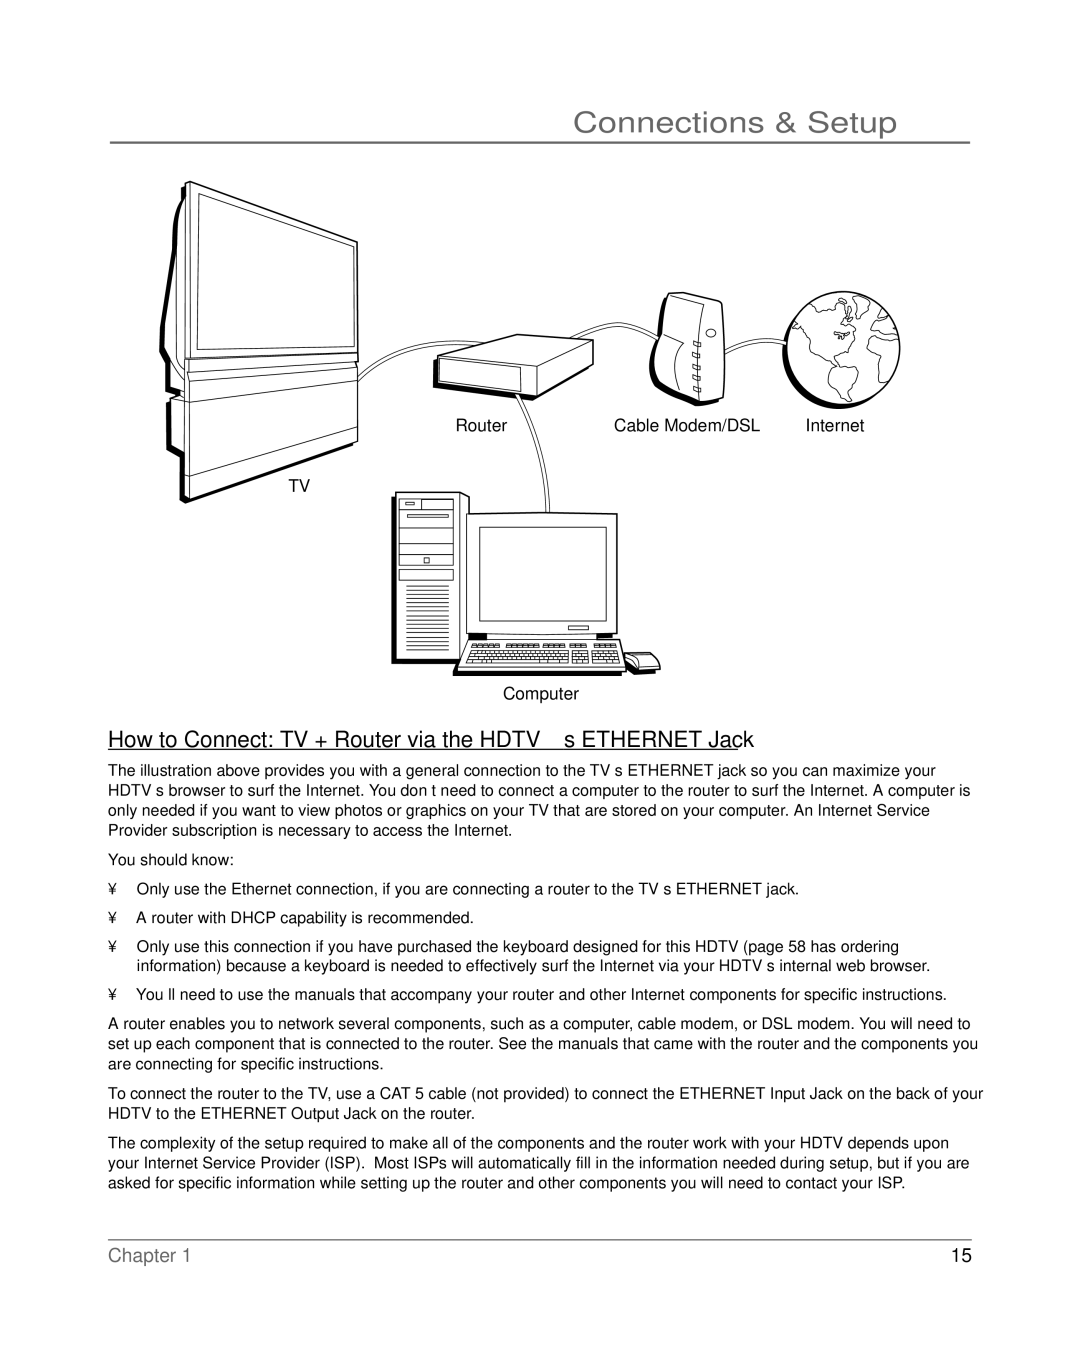 RCA HDLP61 manual How to Connect TV + Router via the HDTV’s Ethernet Jack, You should know 